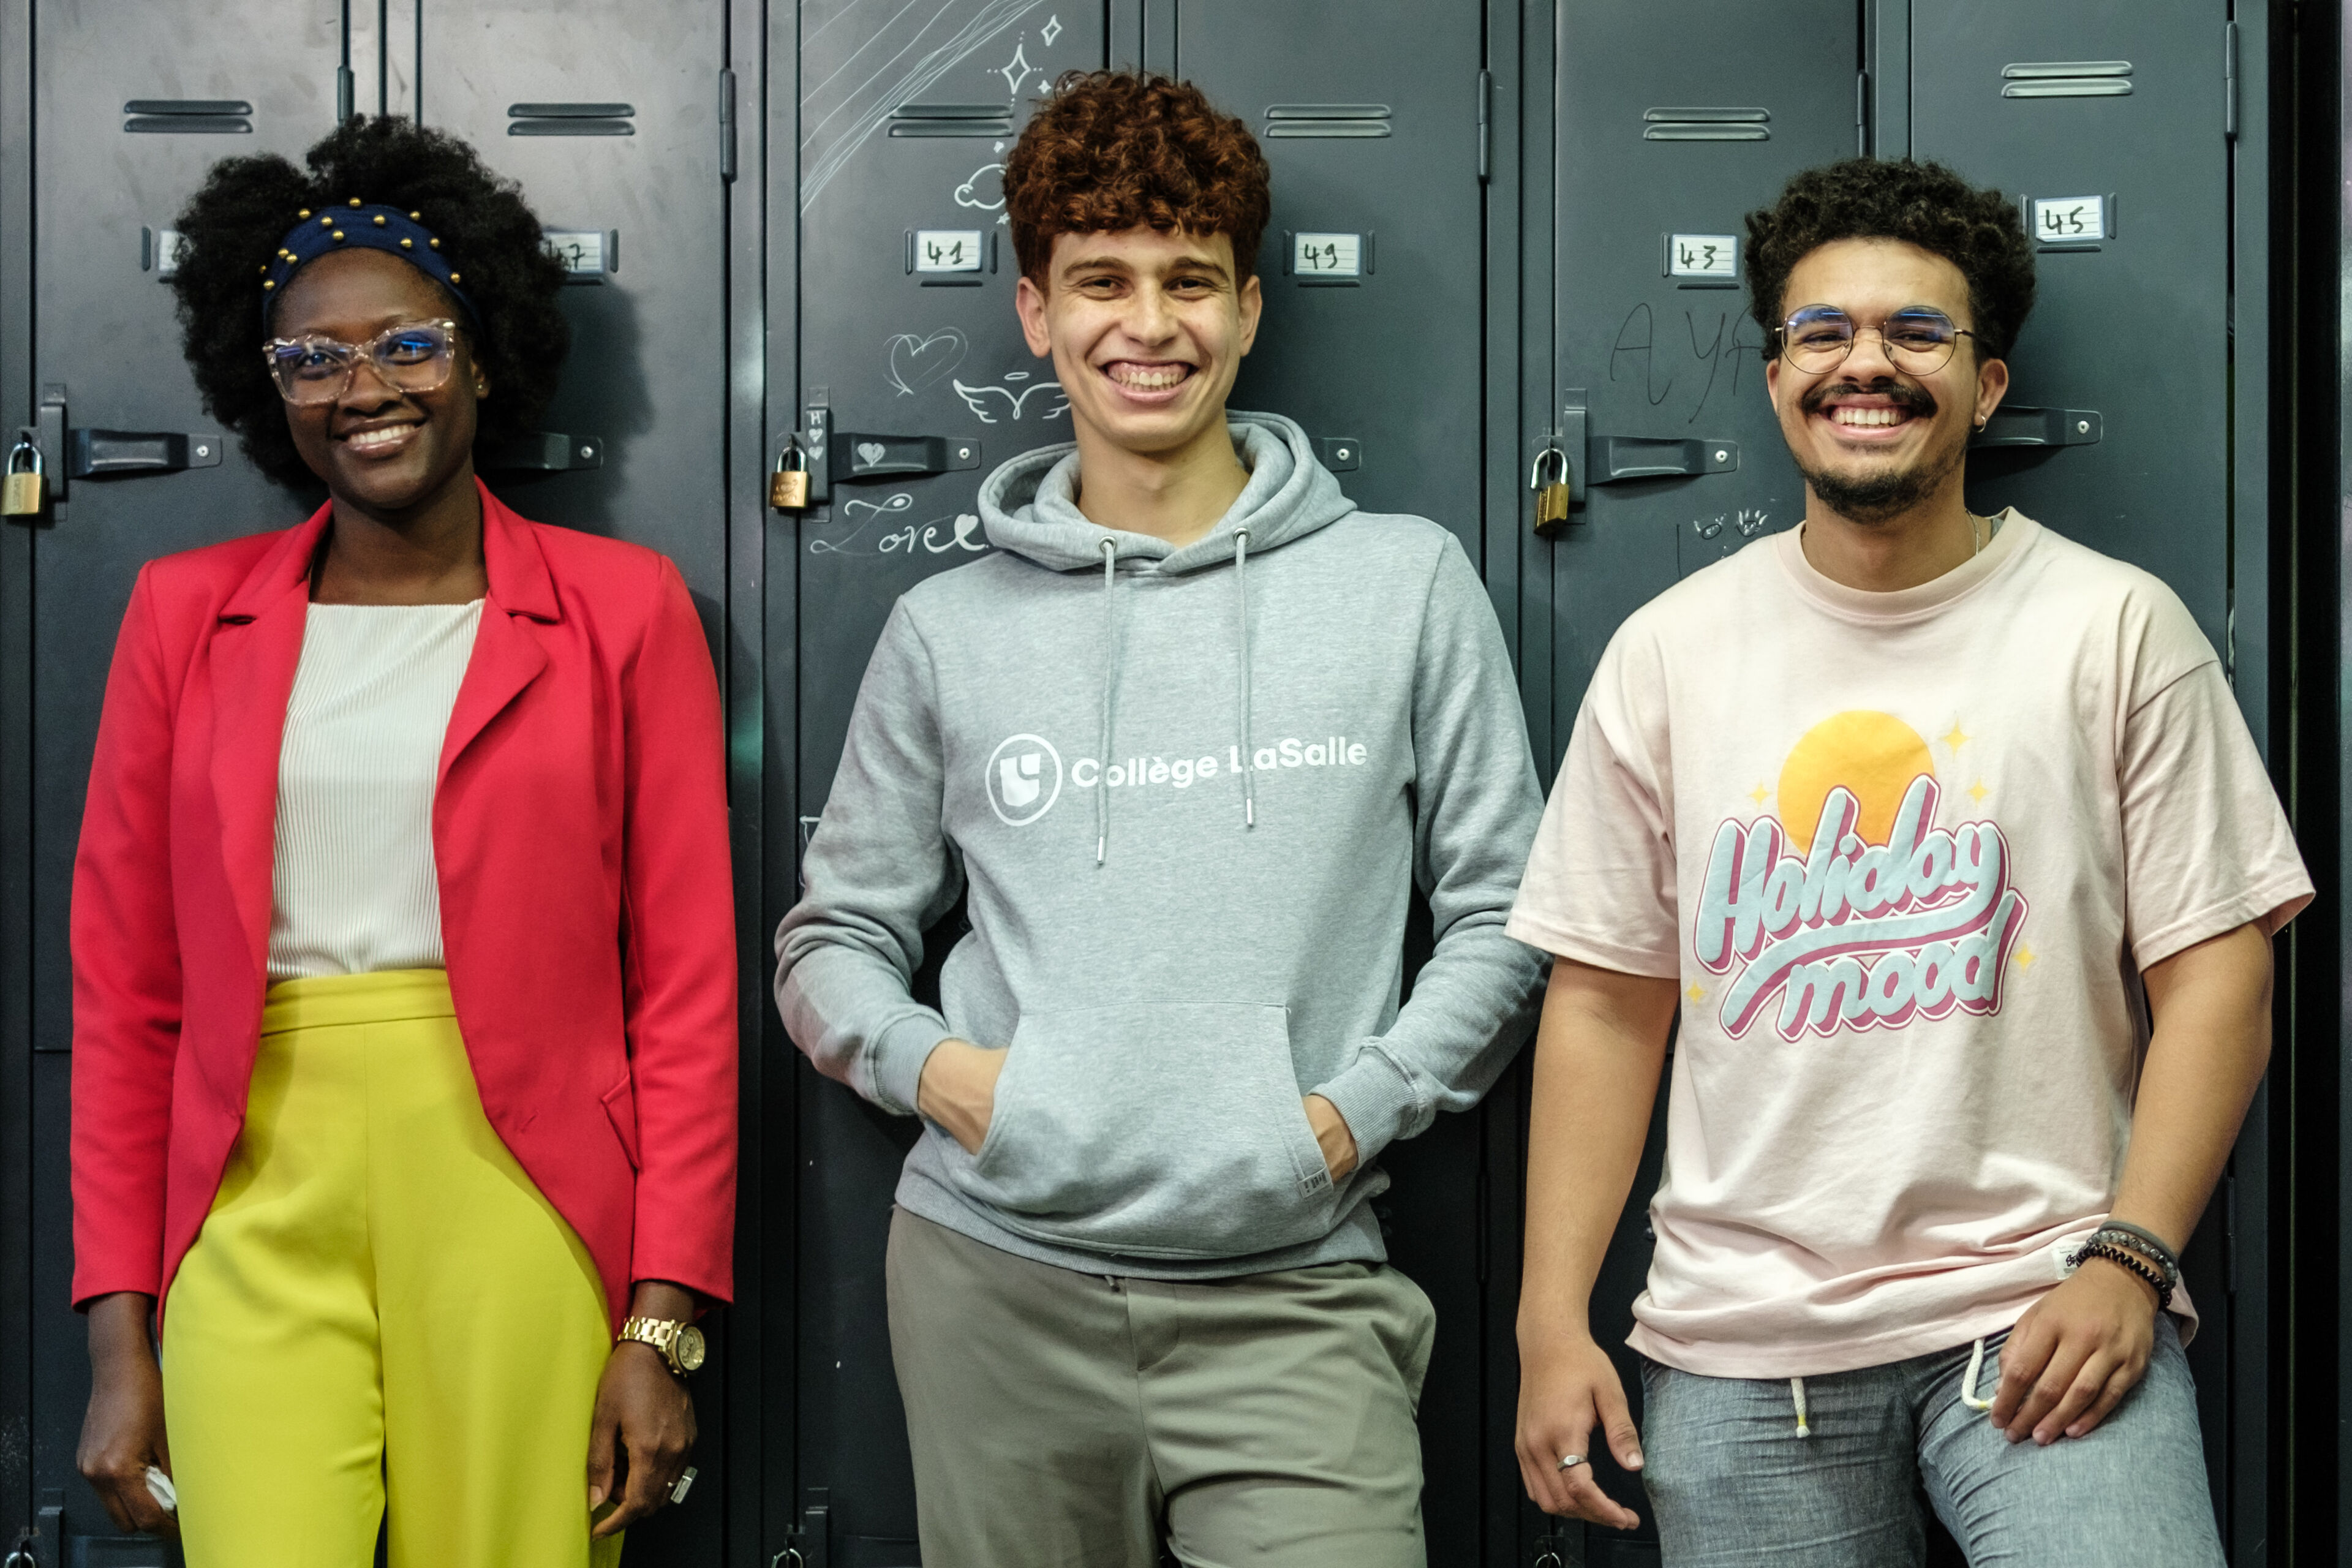 Three students stand smiling in front of their lockers, capturing a moment of campus camaraderie.